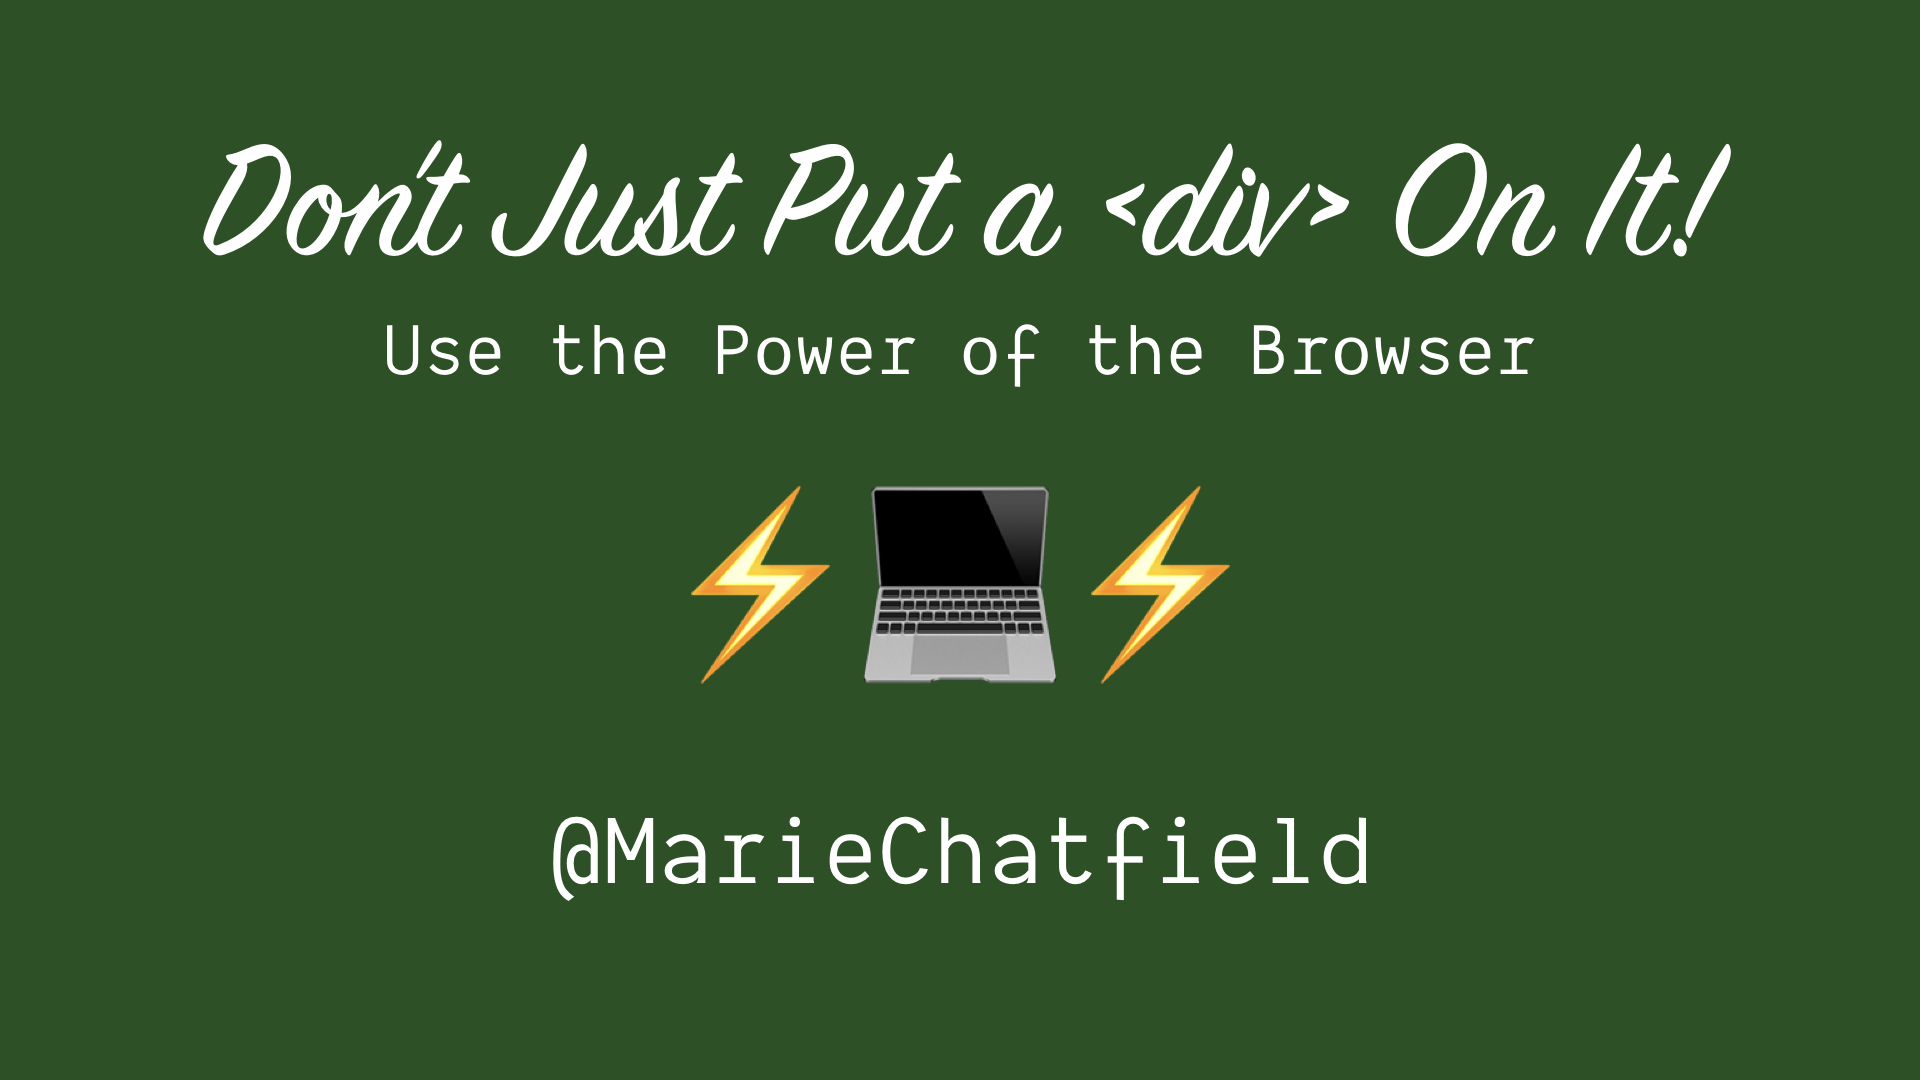 Slide with title Don't Just Put a <div> On It! Use the Power of the Browser and emojis of a computer and lightning bolts, followed by @MarieChatfield.